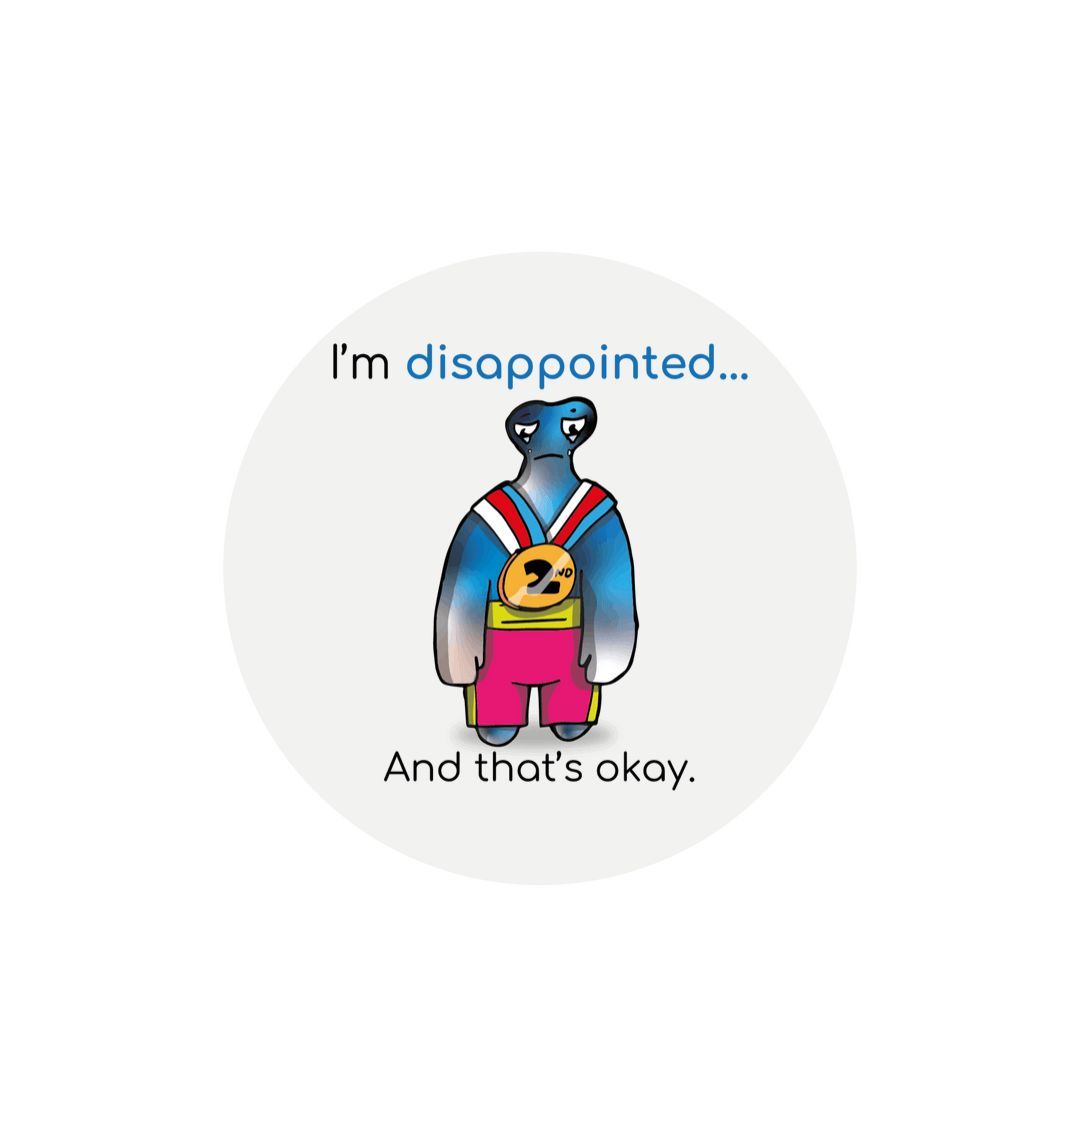 White \"I'm disappointed... And that's okay!\" Round Children's Emotions Sticker 60mm x 60mm